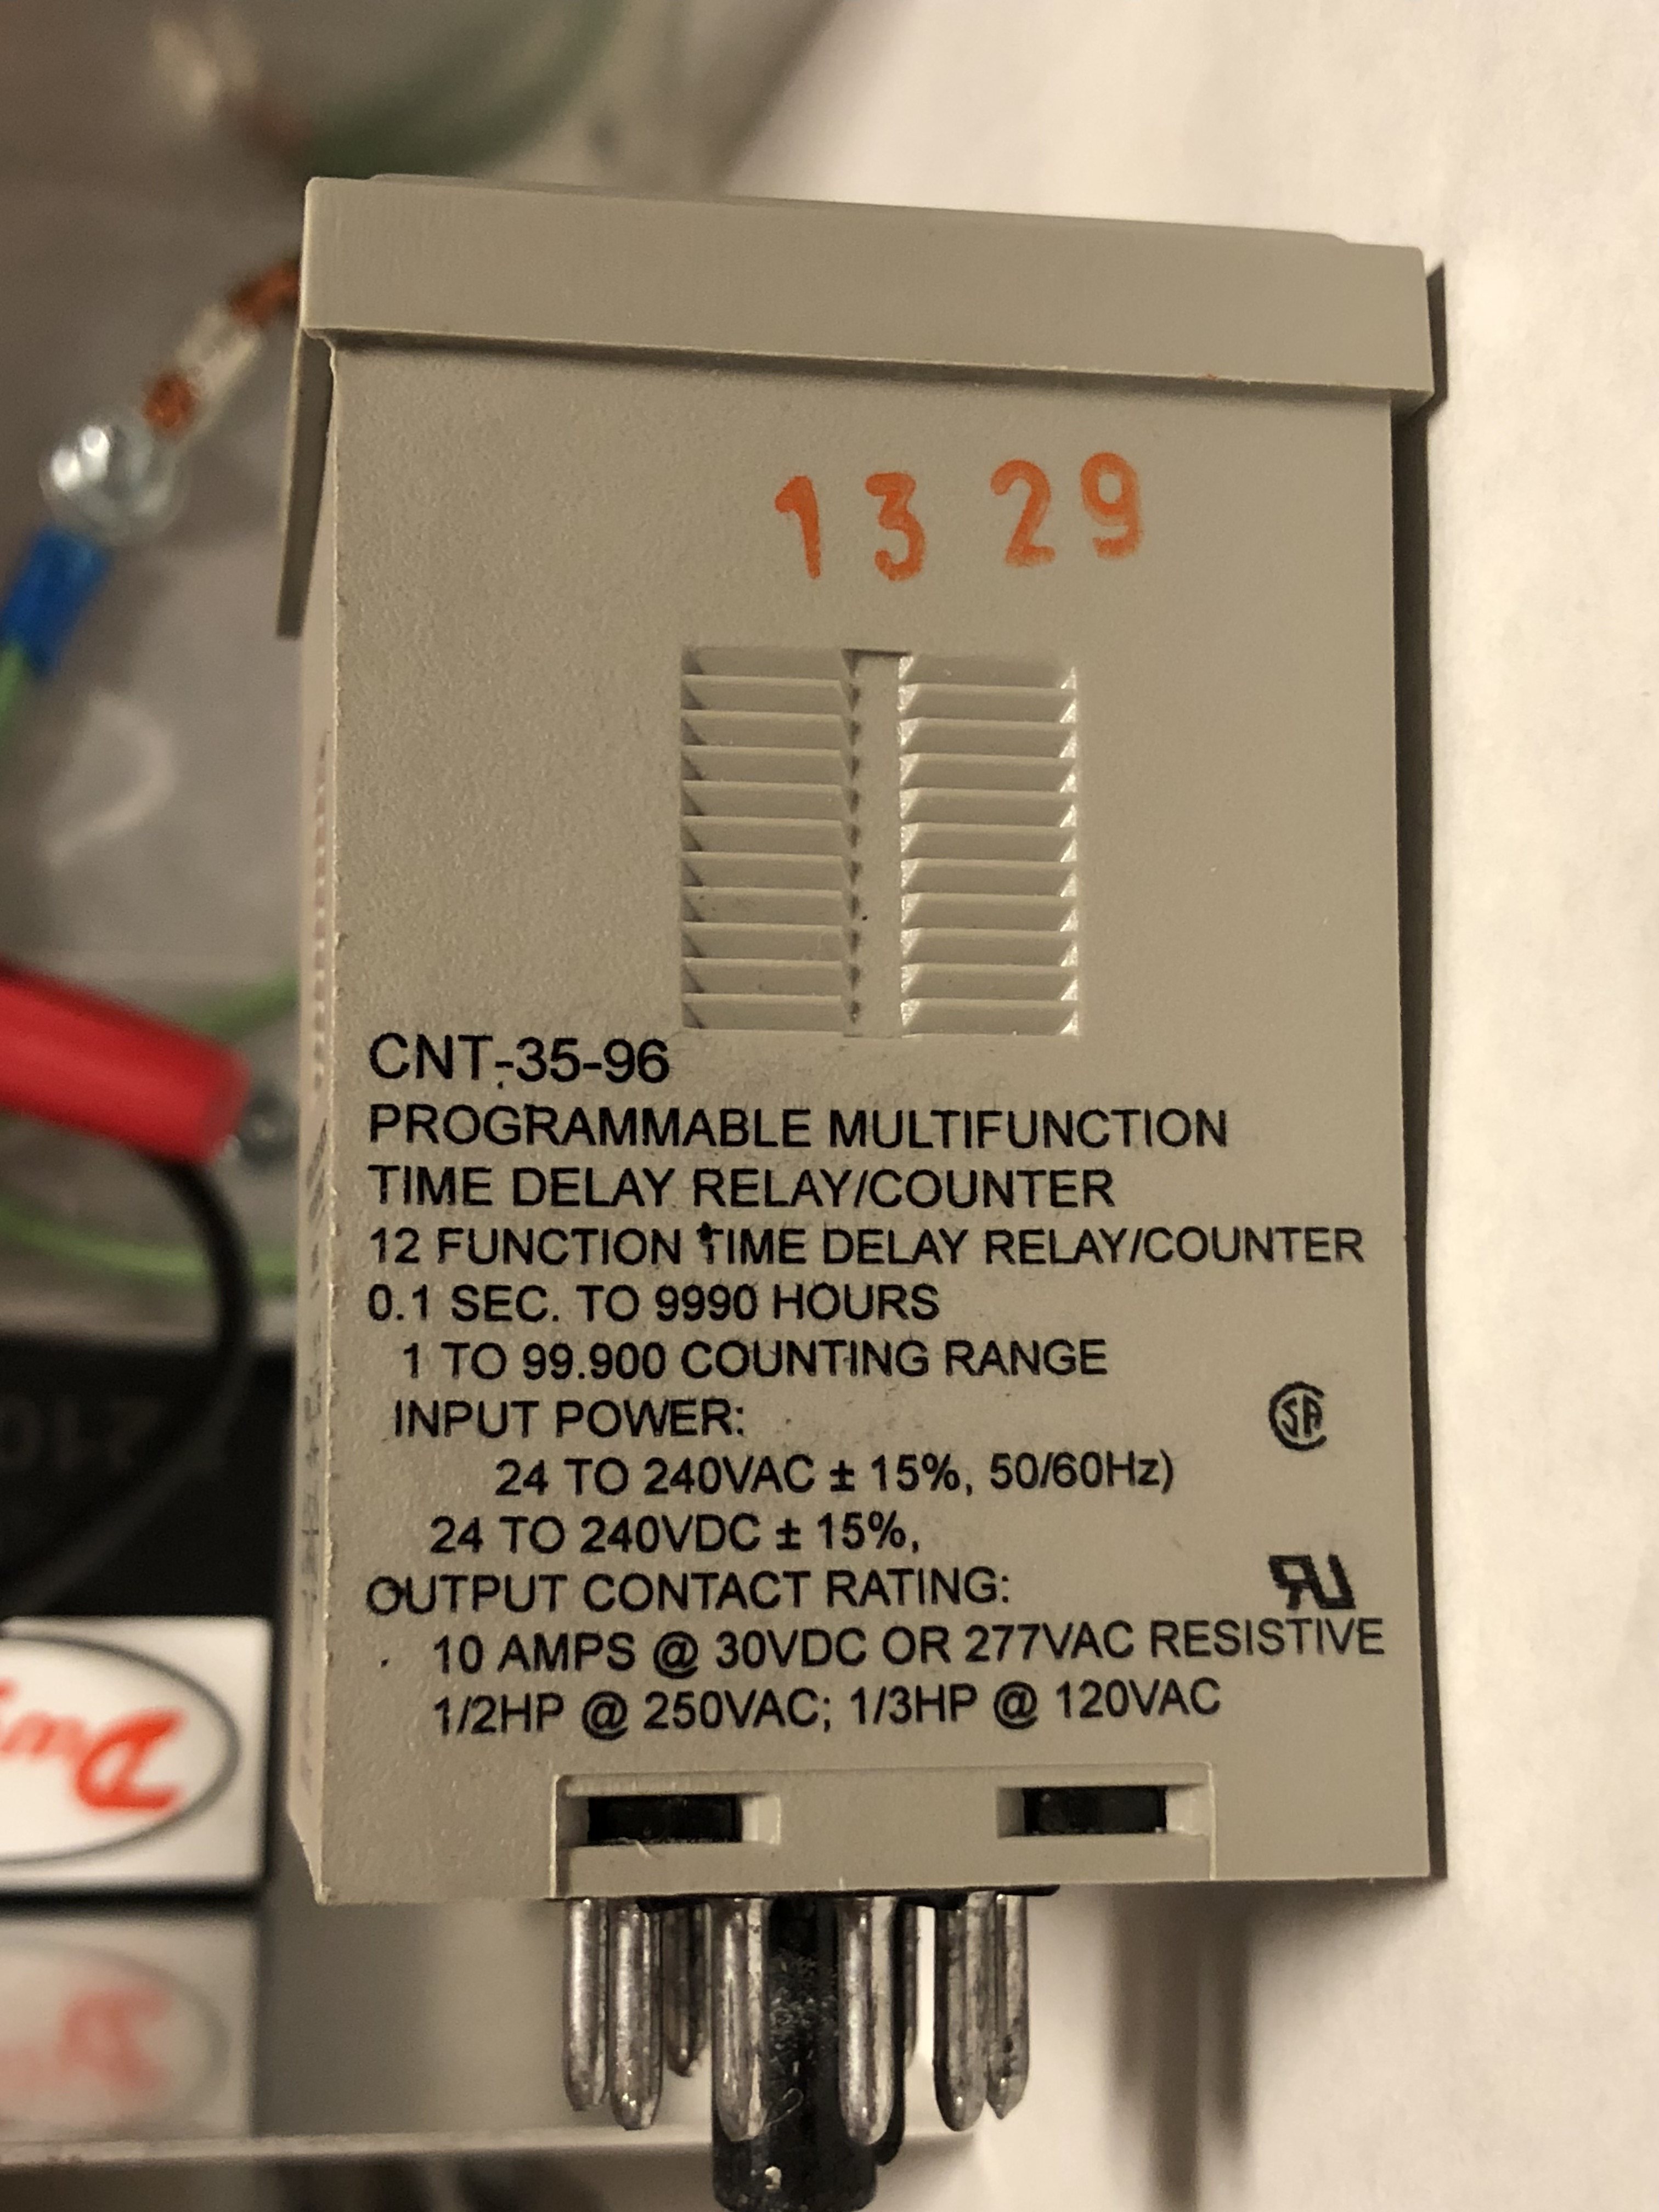 Tyco CNT-35-96 Universal Time Delay Relay